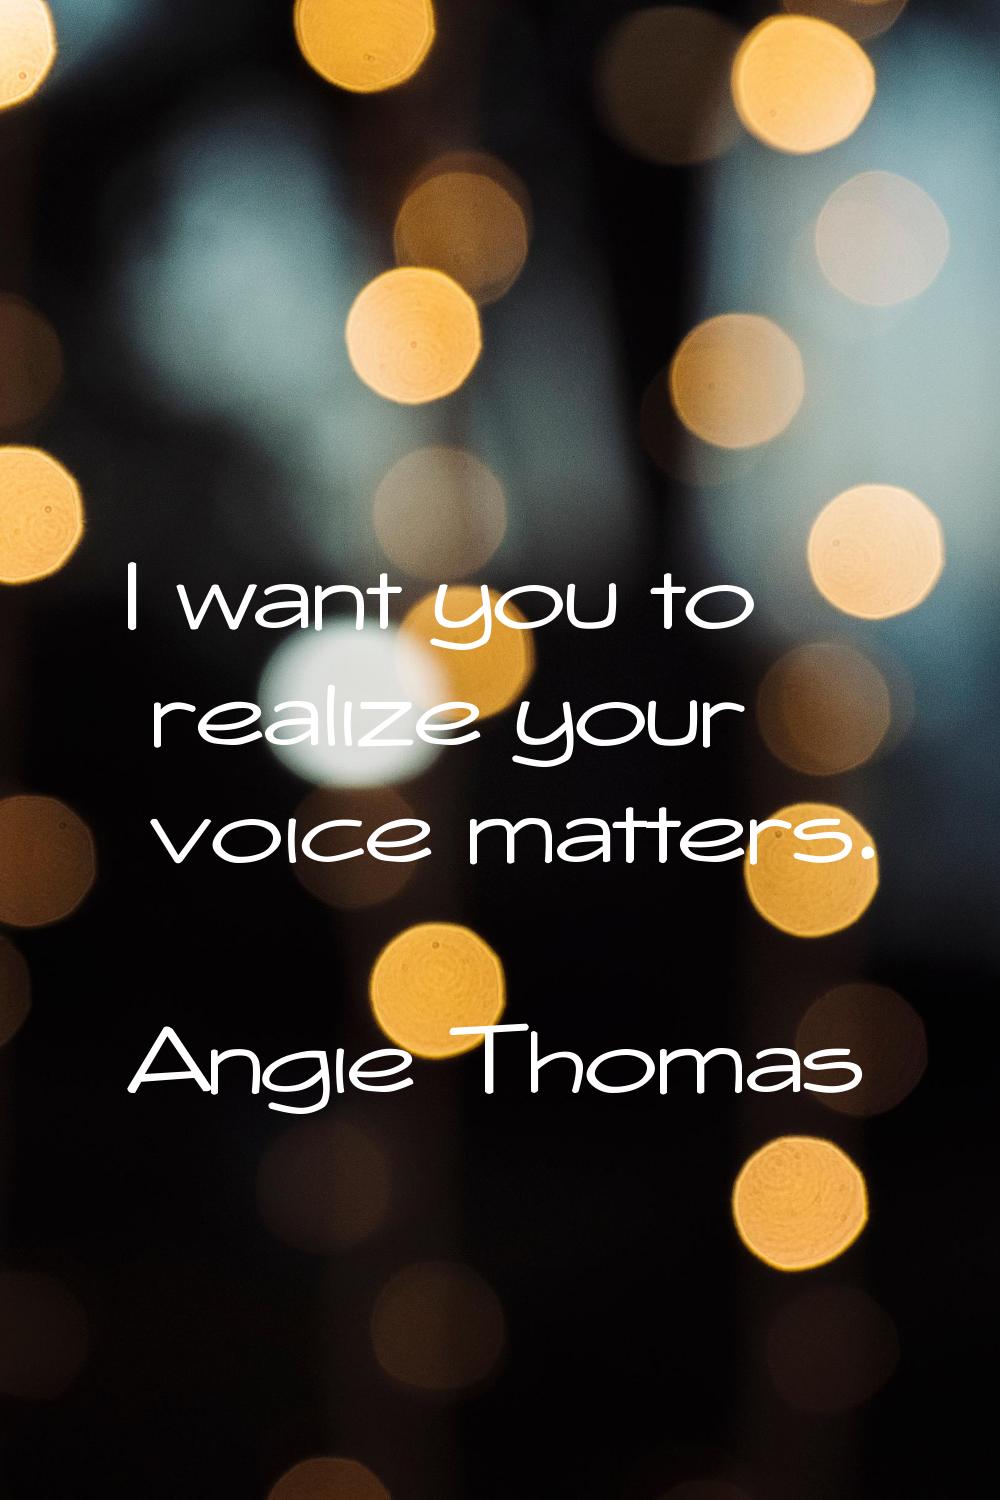 I want you to realize your voice matters.